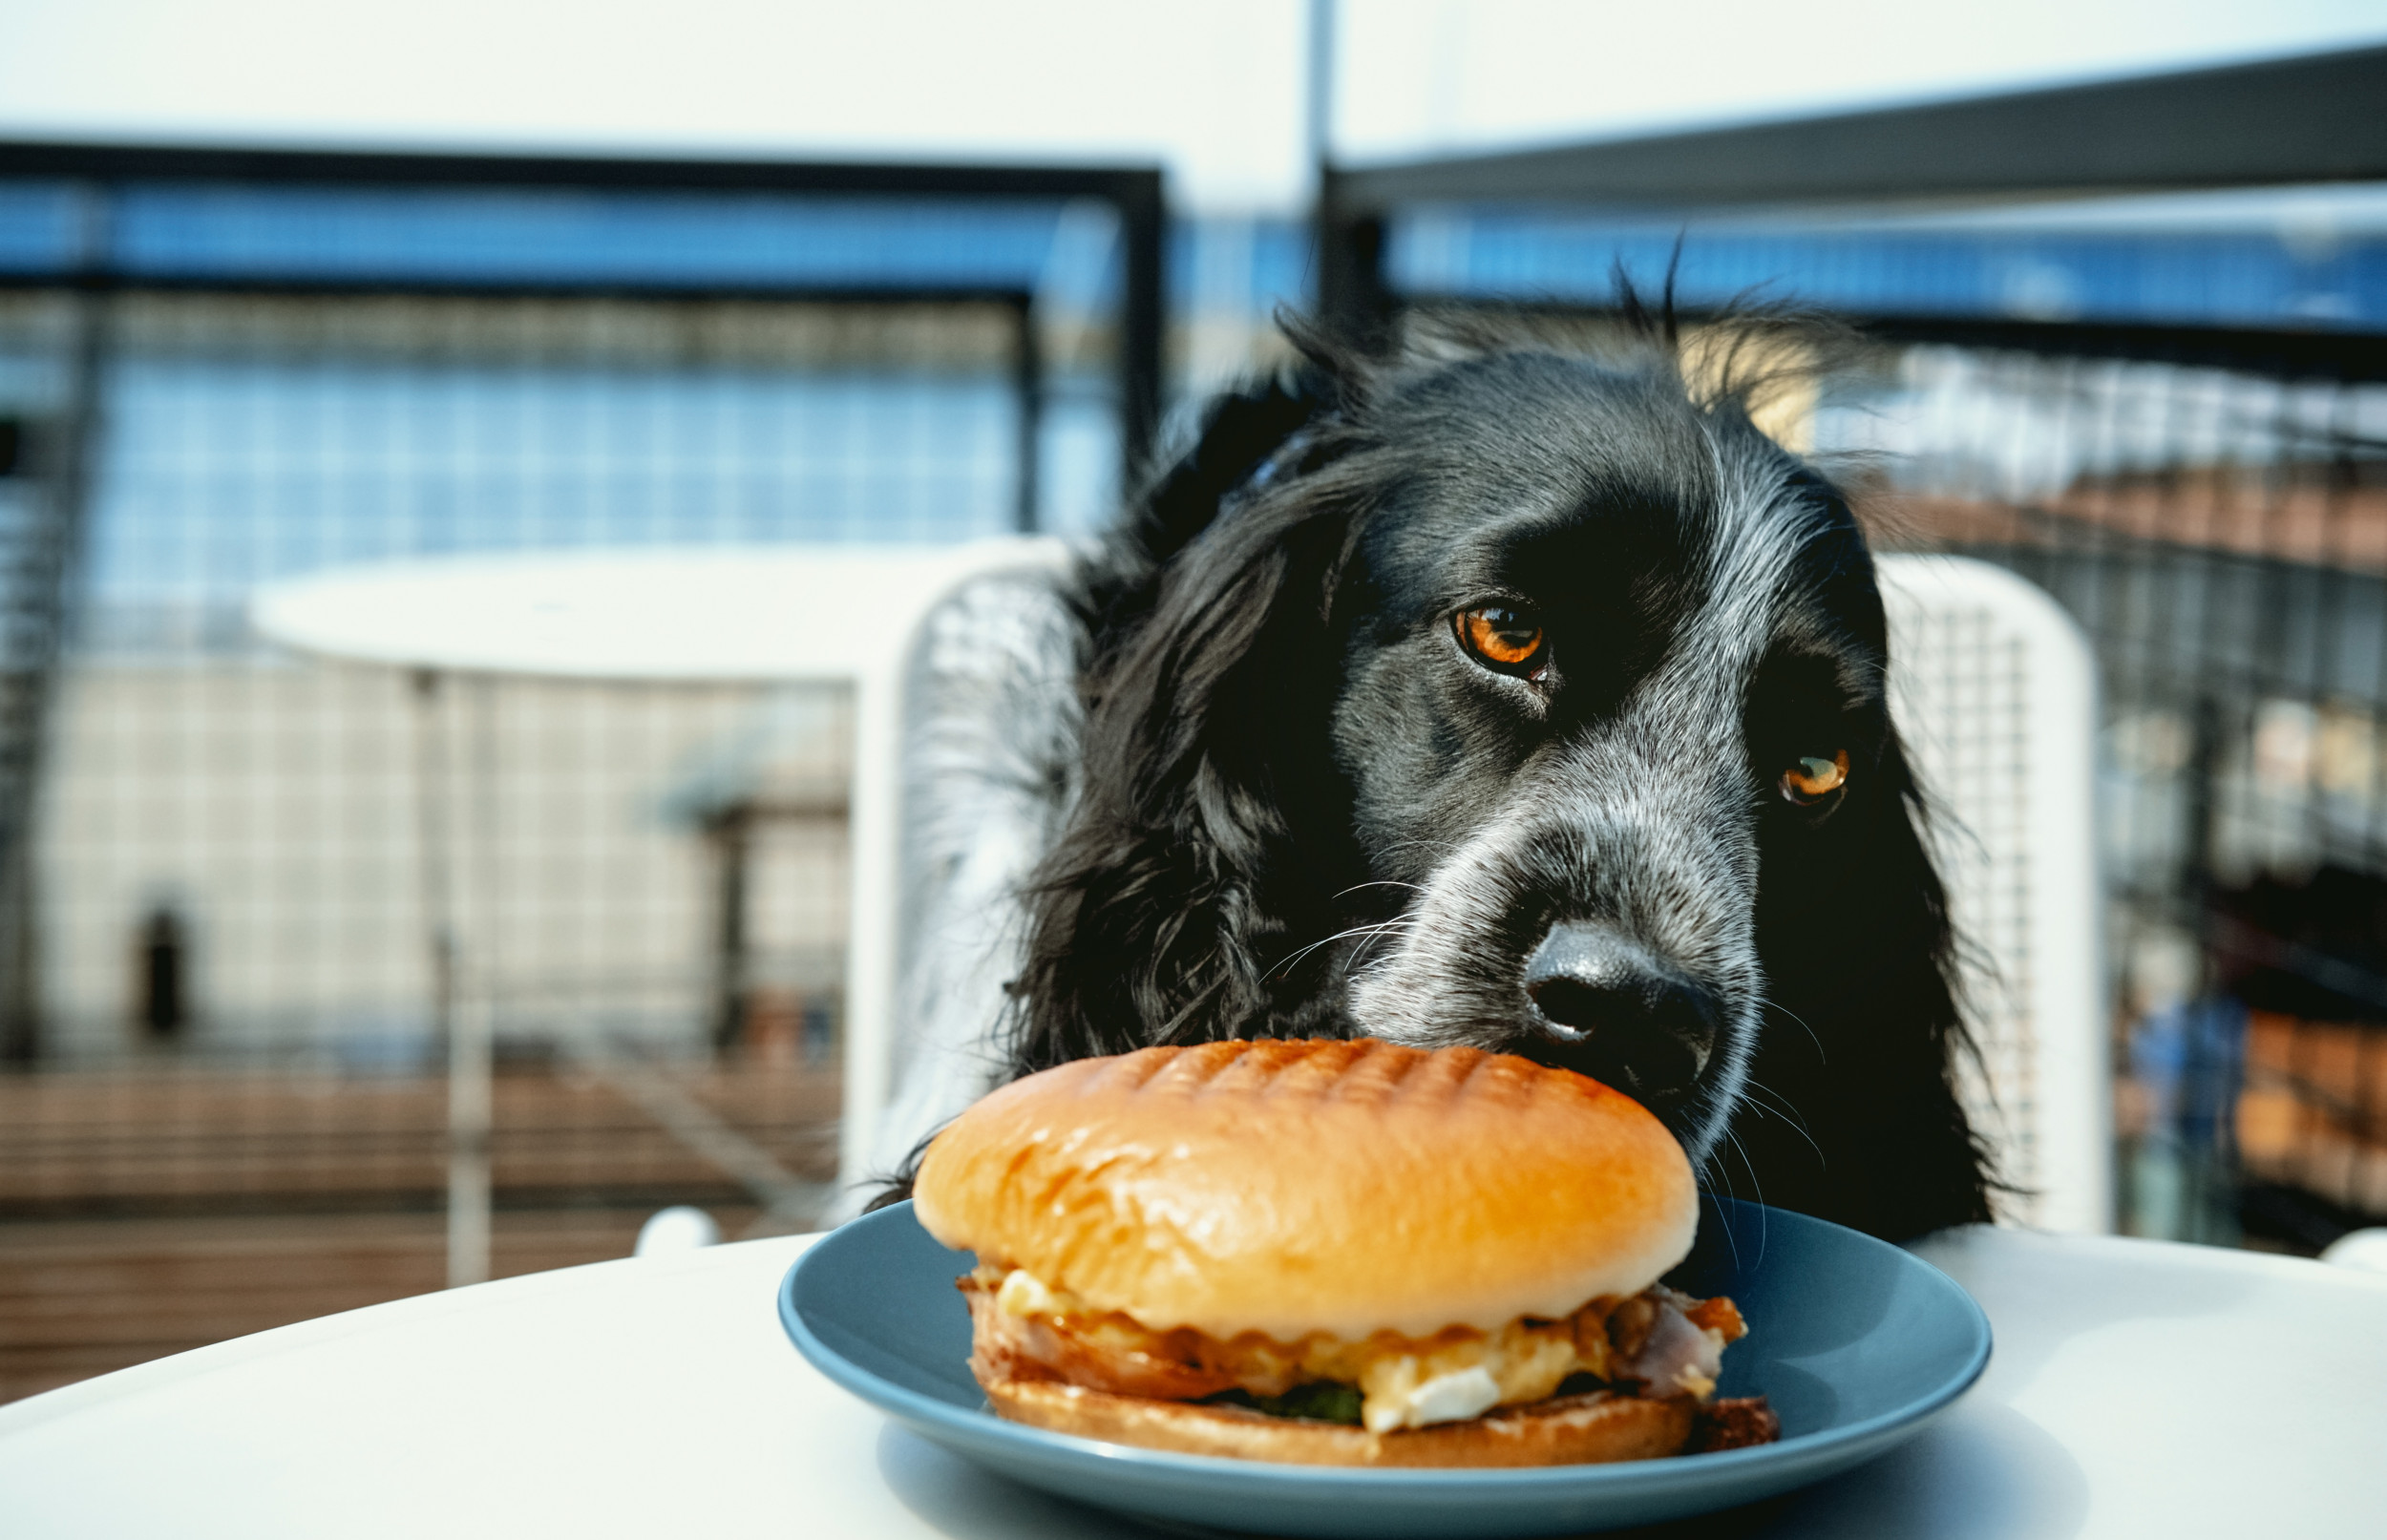 Rescue Dogs Enjoying McDonald's Burger For First Time Melt Hearts